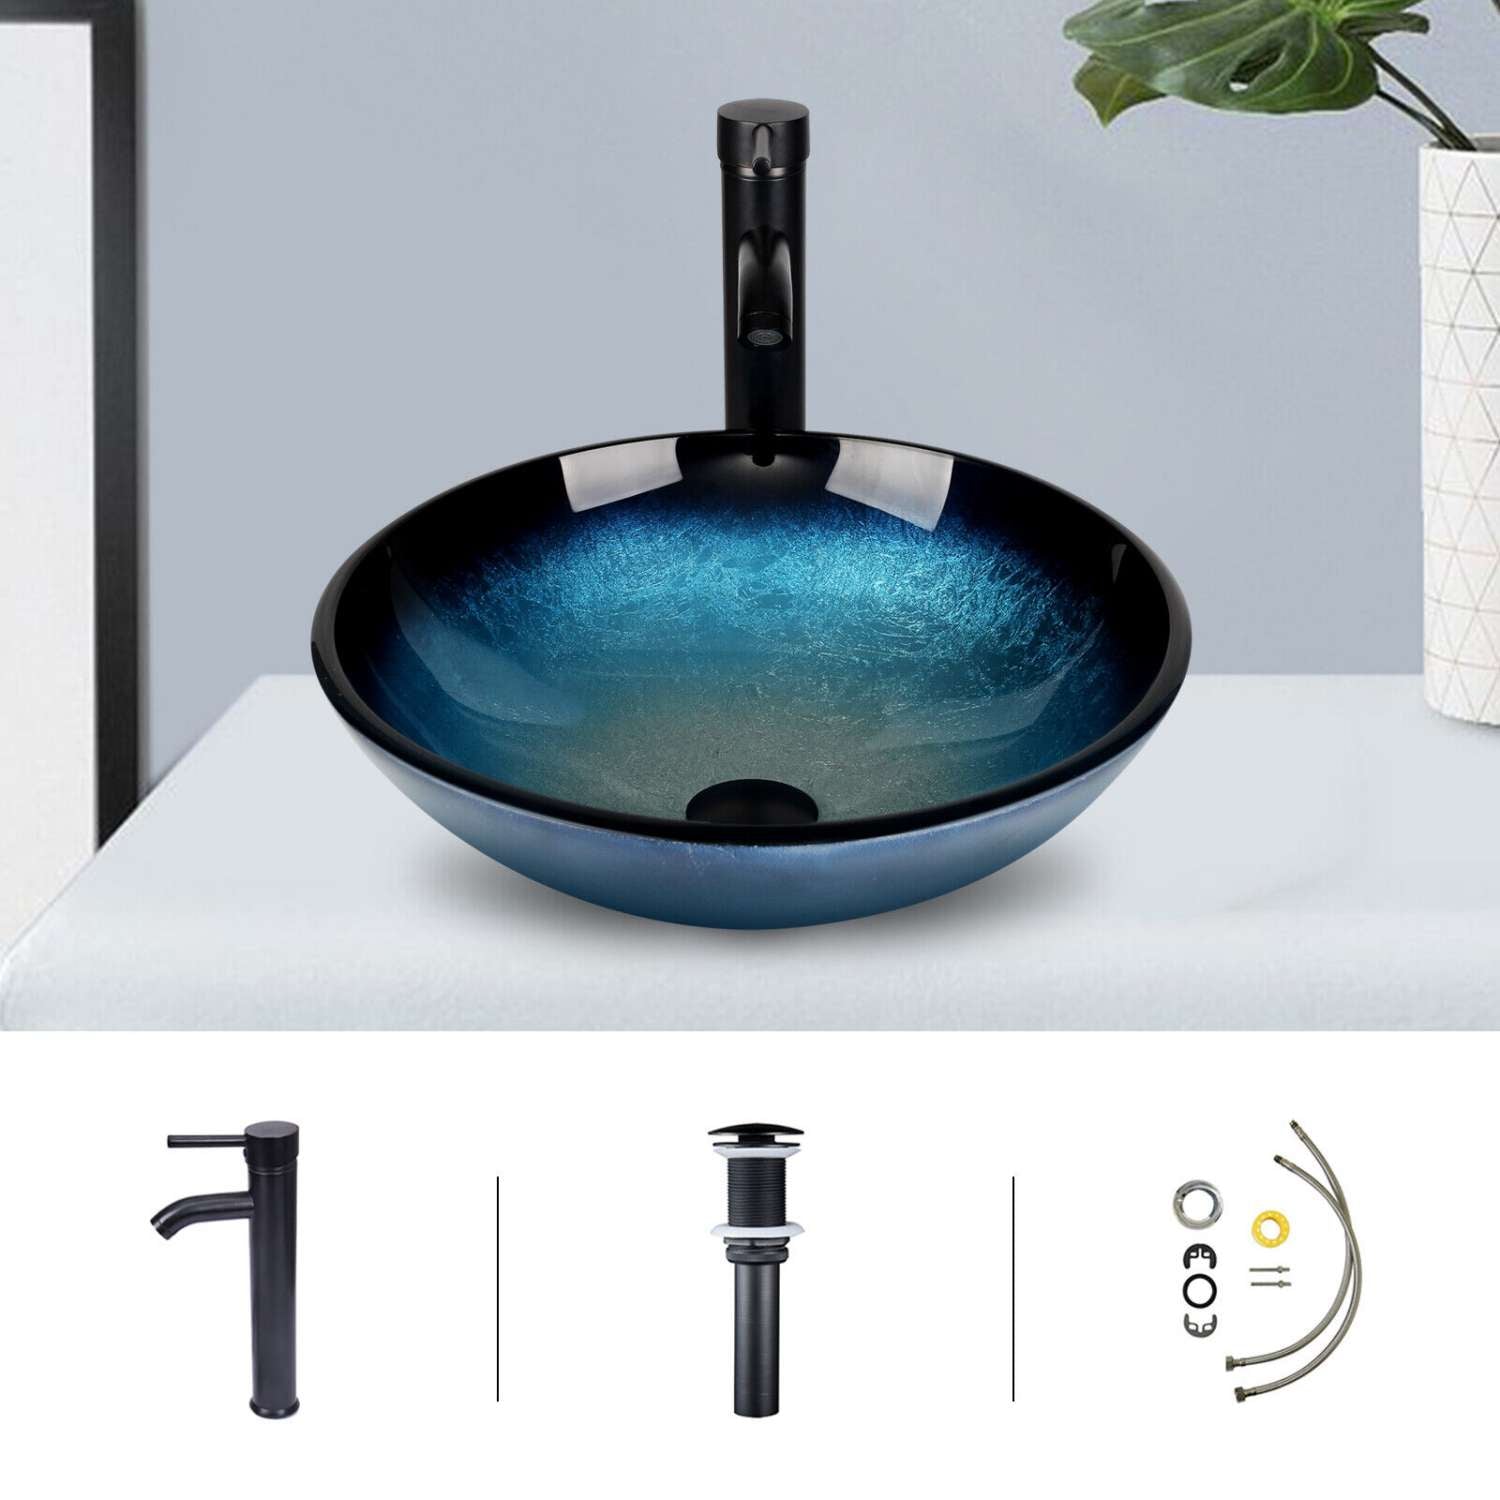 Elecwish Shiny blue sink included parts